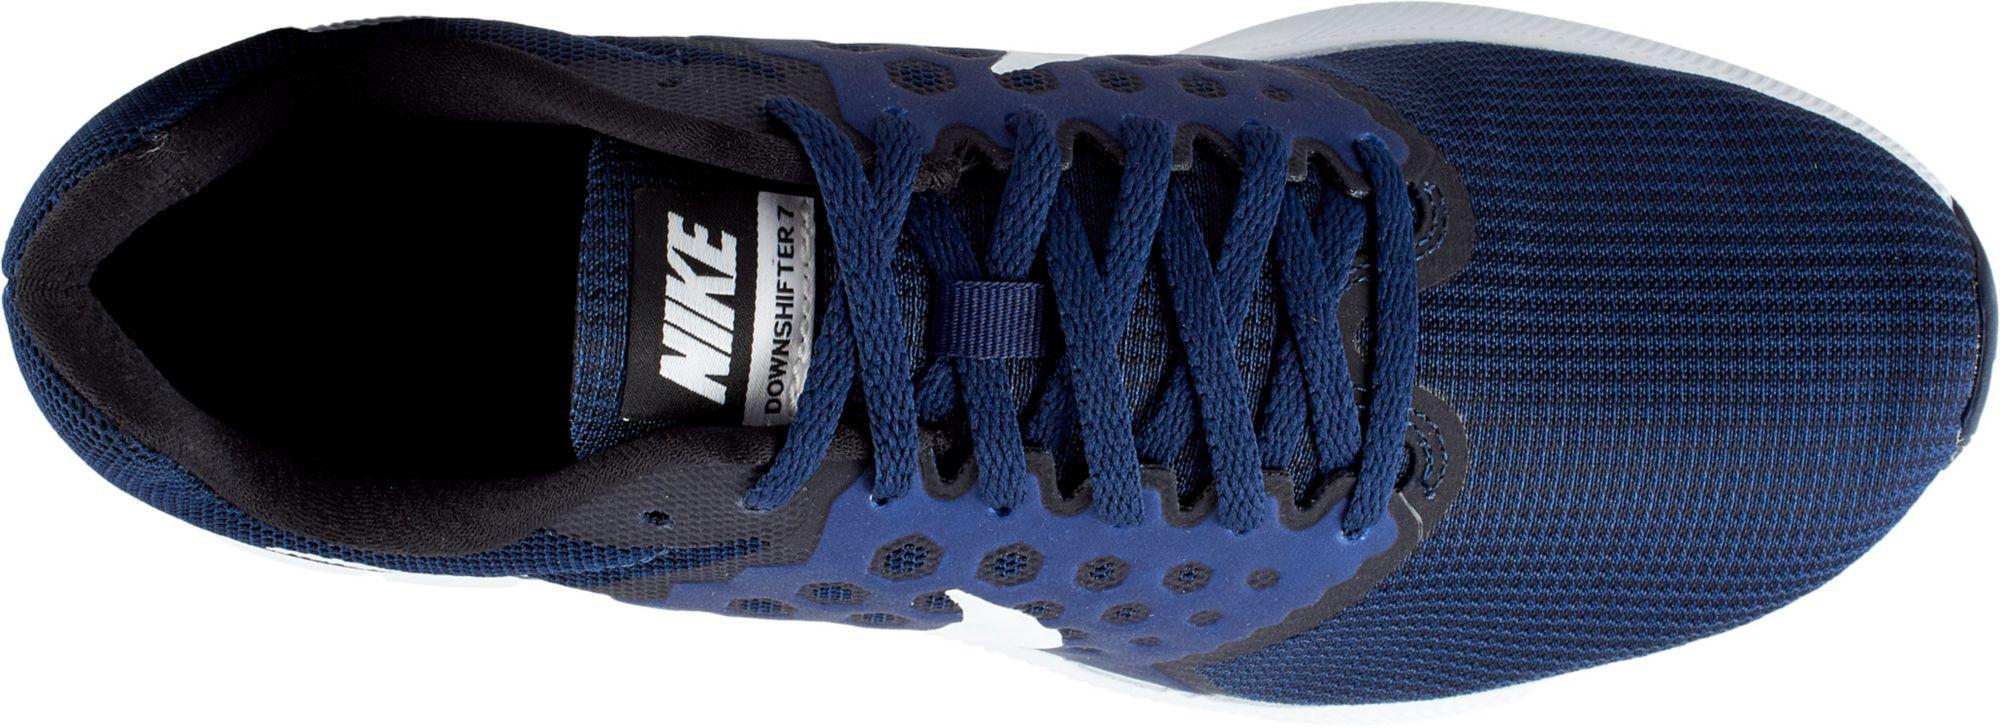 Nike Synthetic Downshifter 7 Running Shoes in Blue for Men - Lyst